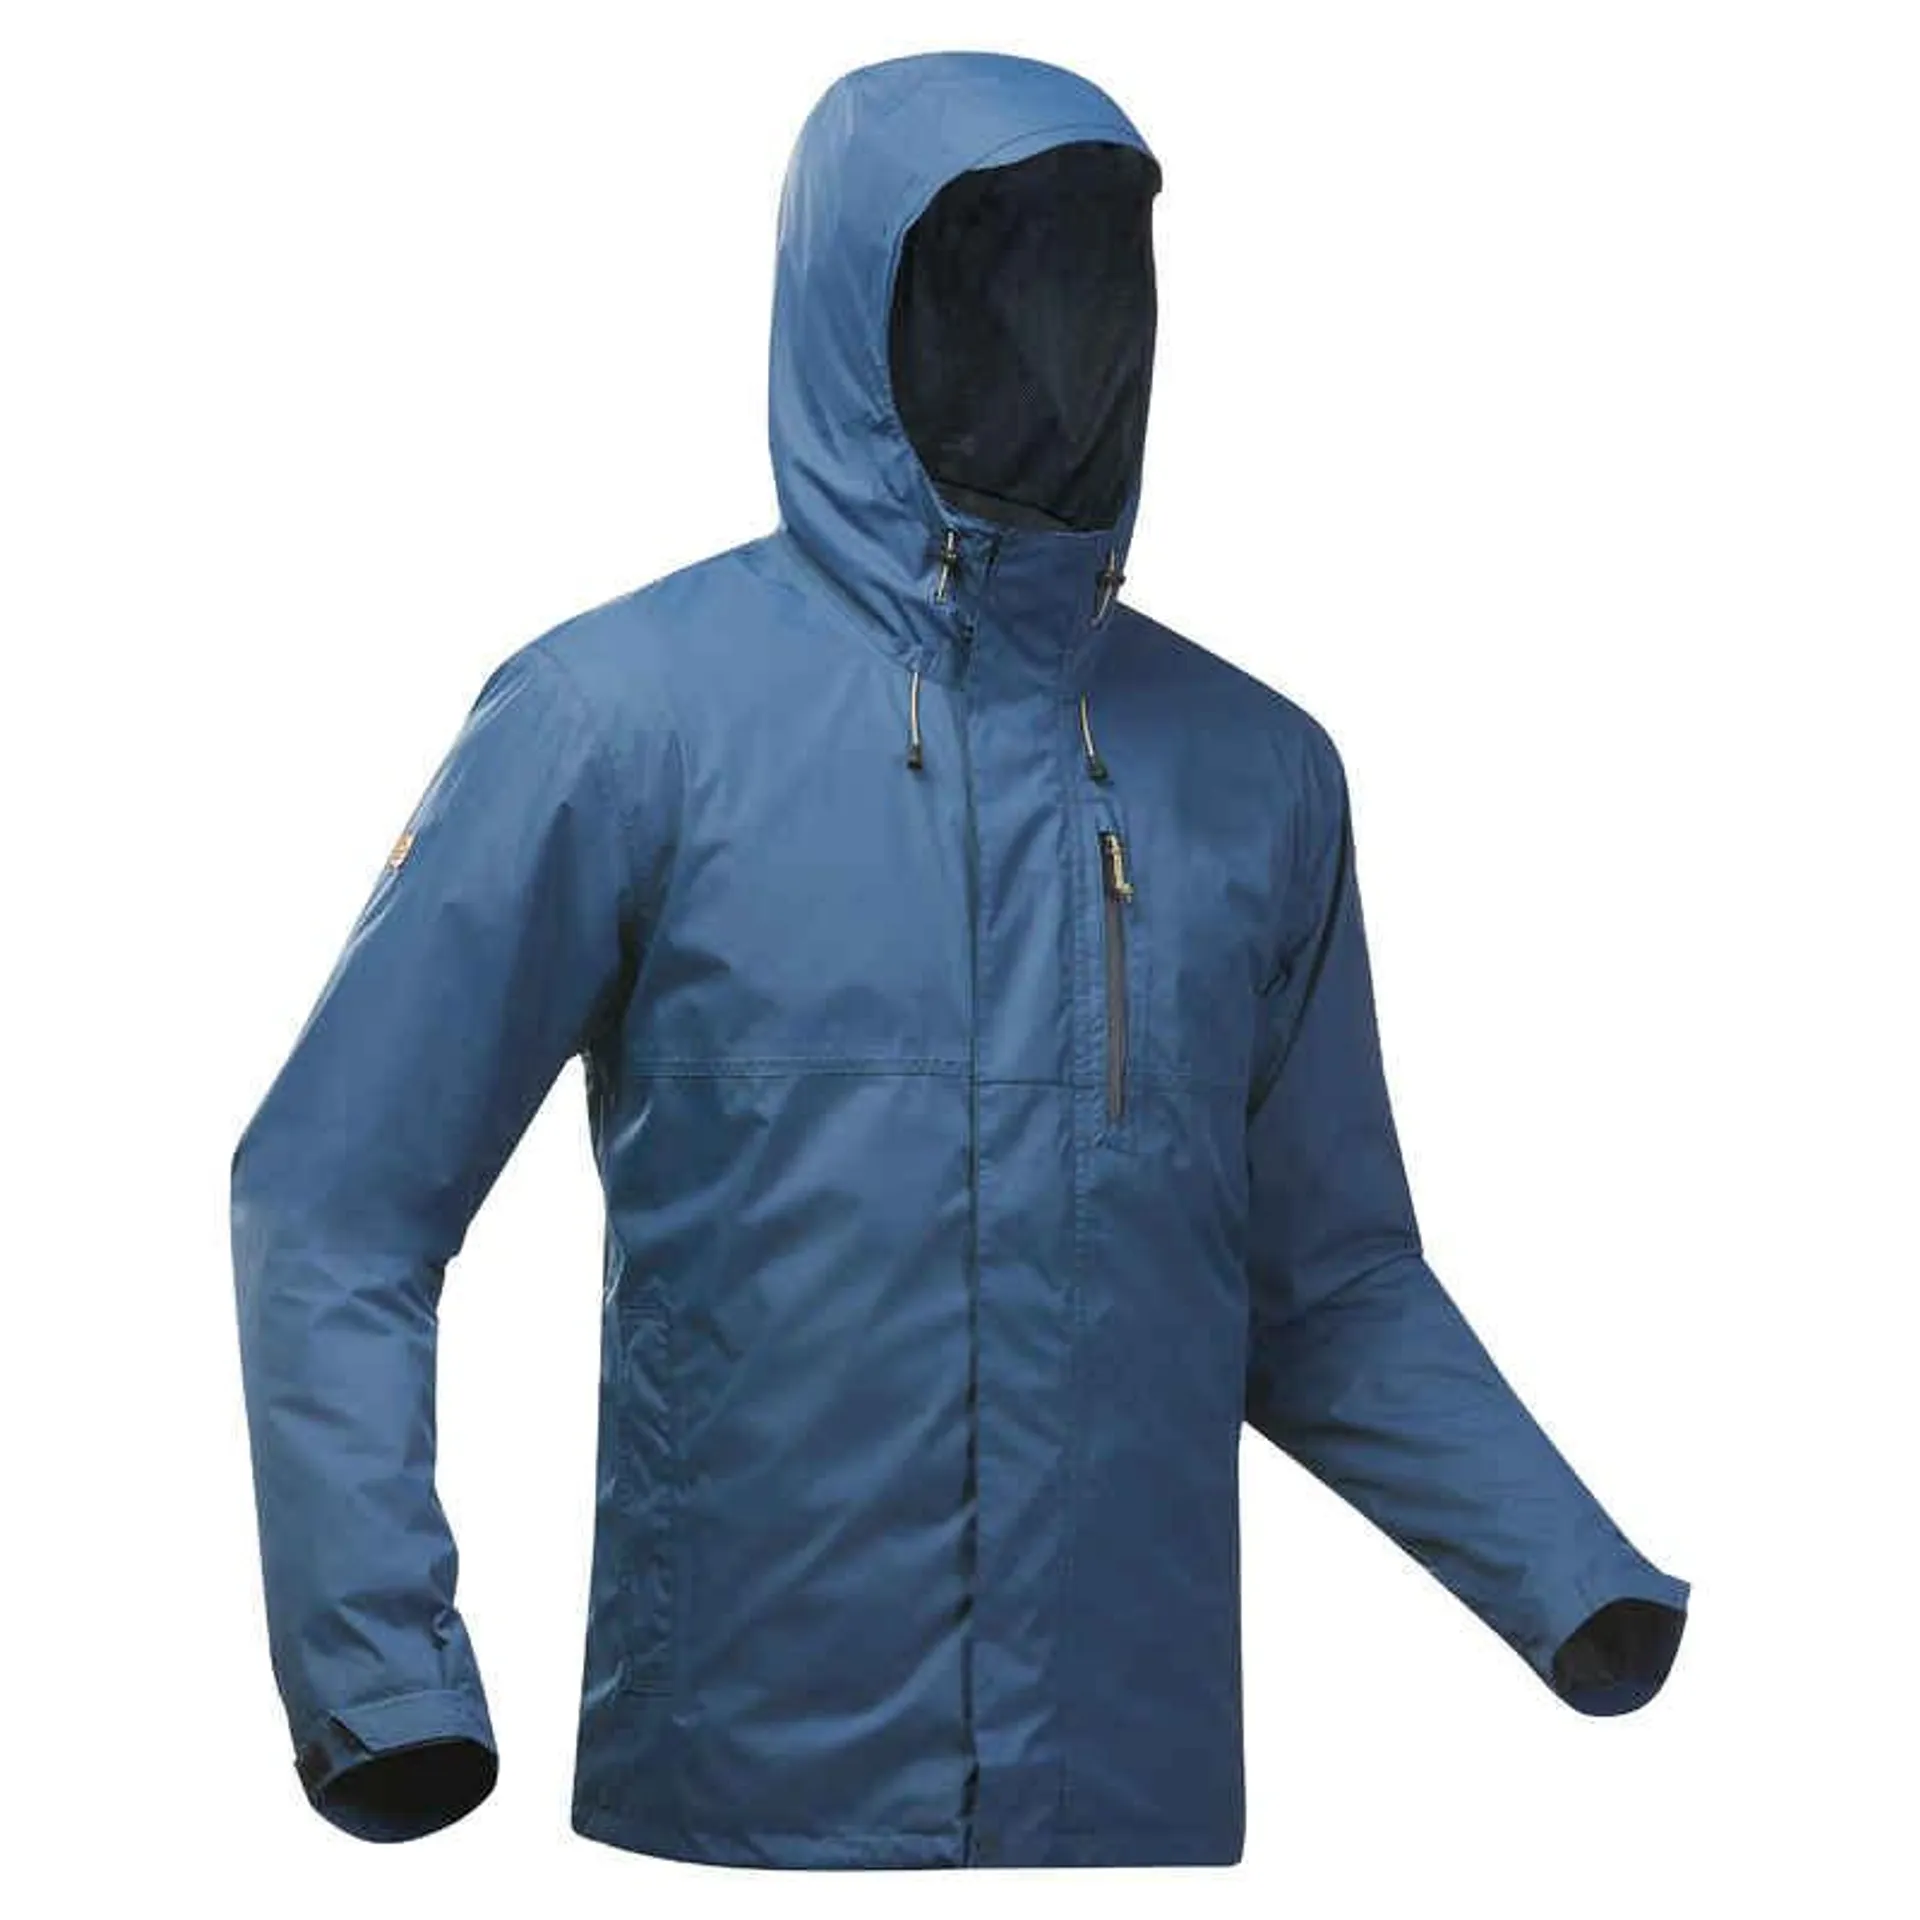 CHAQUETA IMPERMEABLE HOMBRE NH500